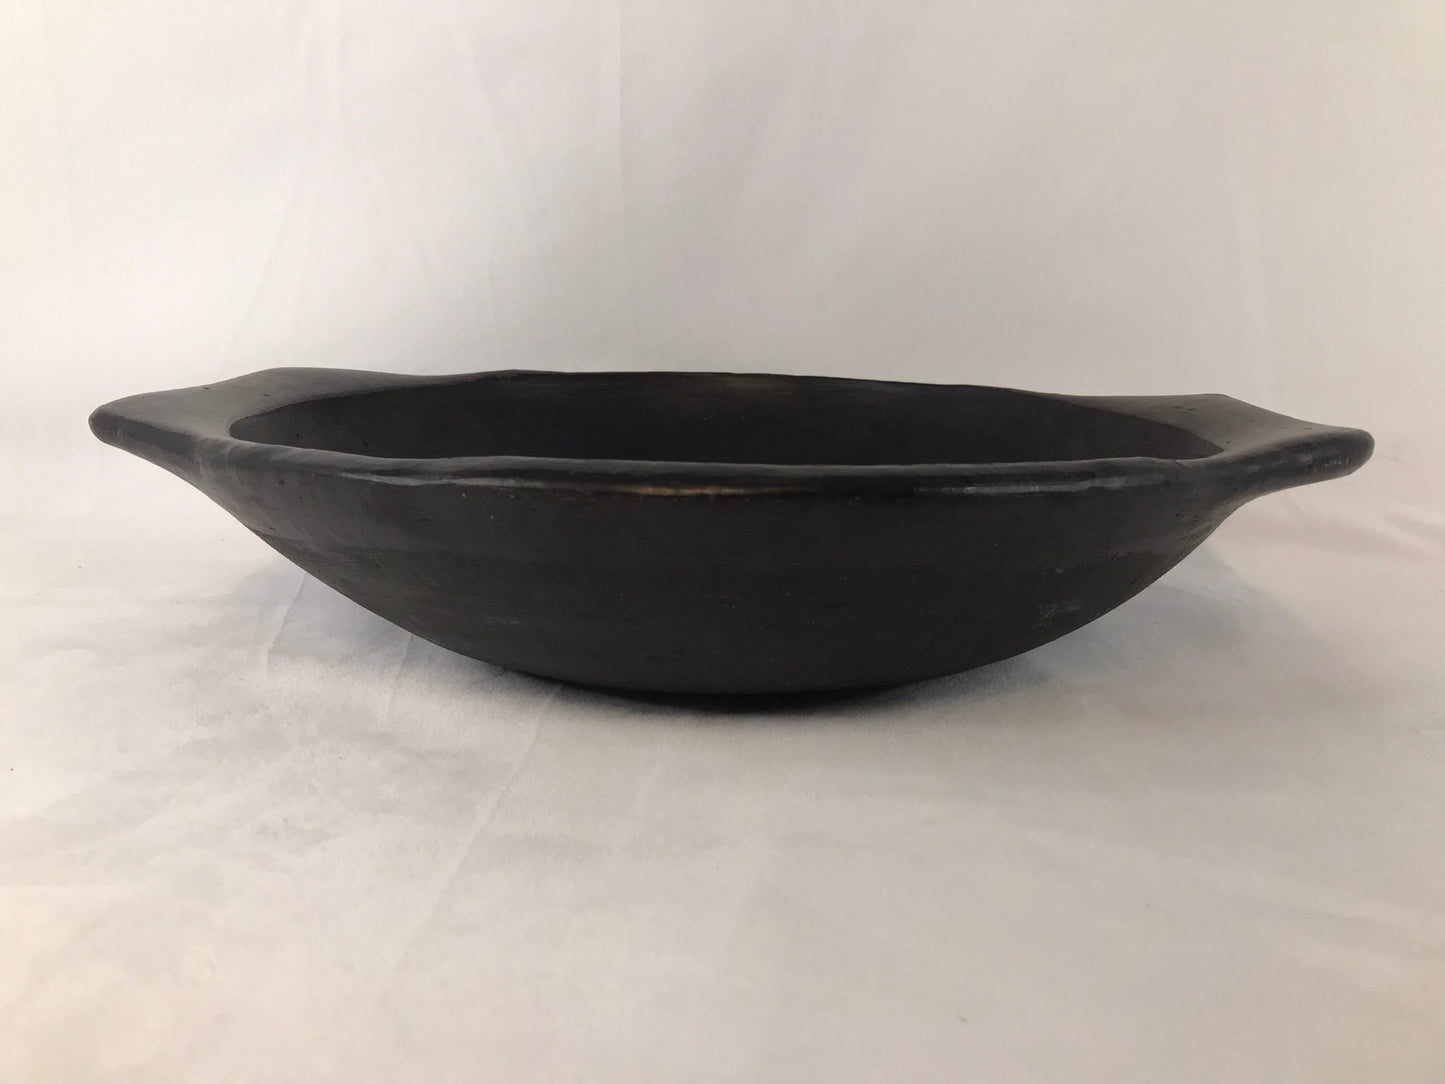 Home and Cottage Black Clay Pottery Large Baking Dish Roasting Pan Walk Outstanding Quality 14 x 16 inch Perfect No Damage